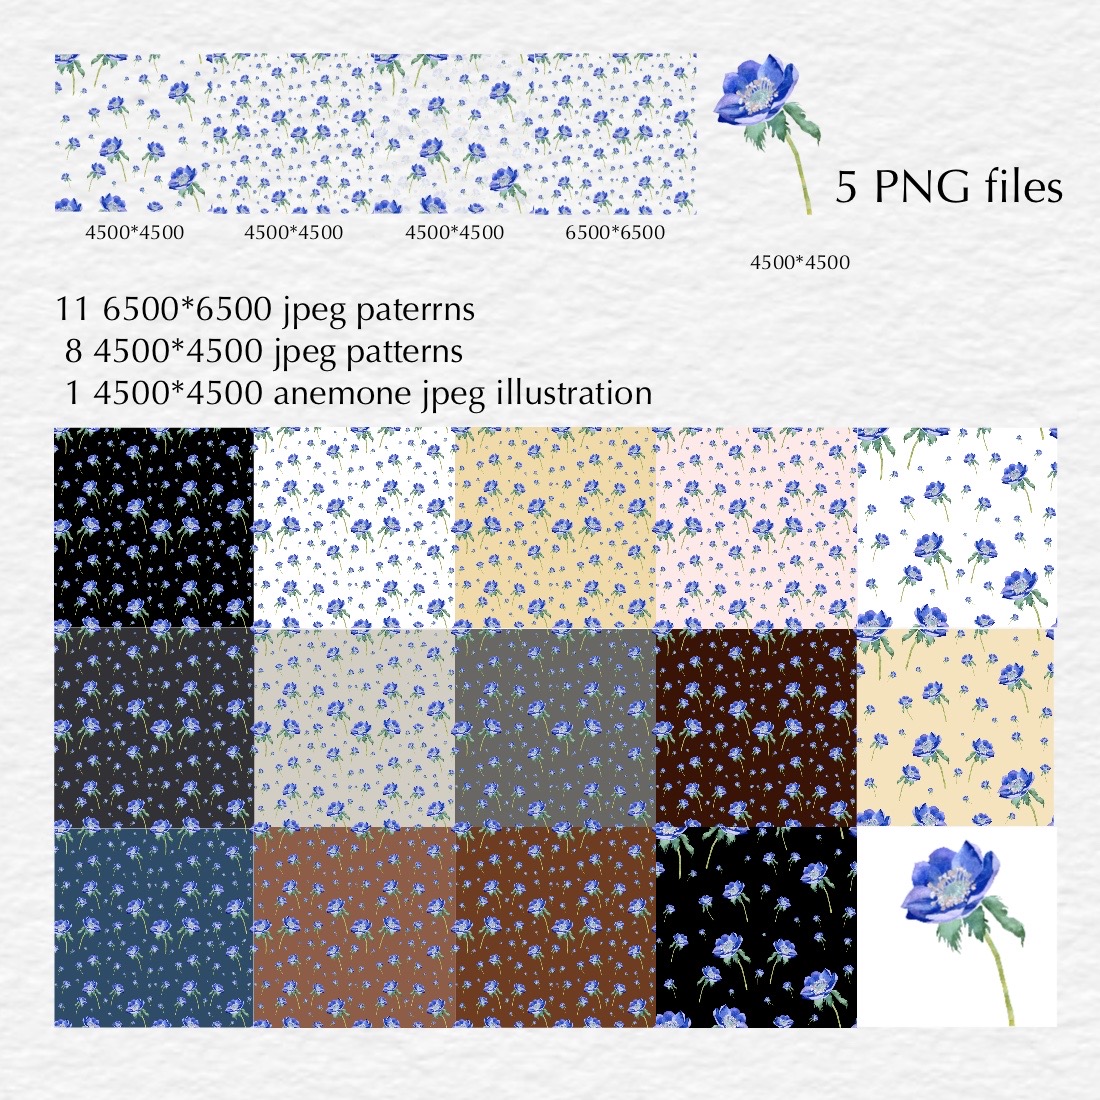 Flower Graphics and Seamless Patterns cover image.